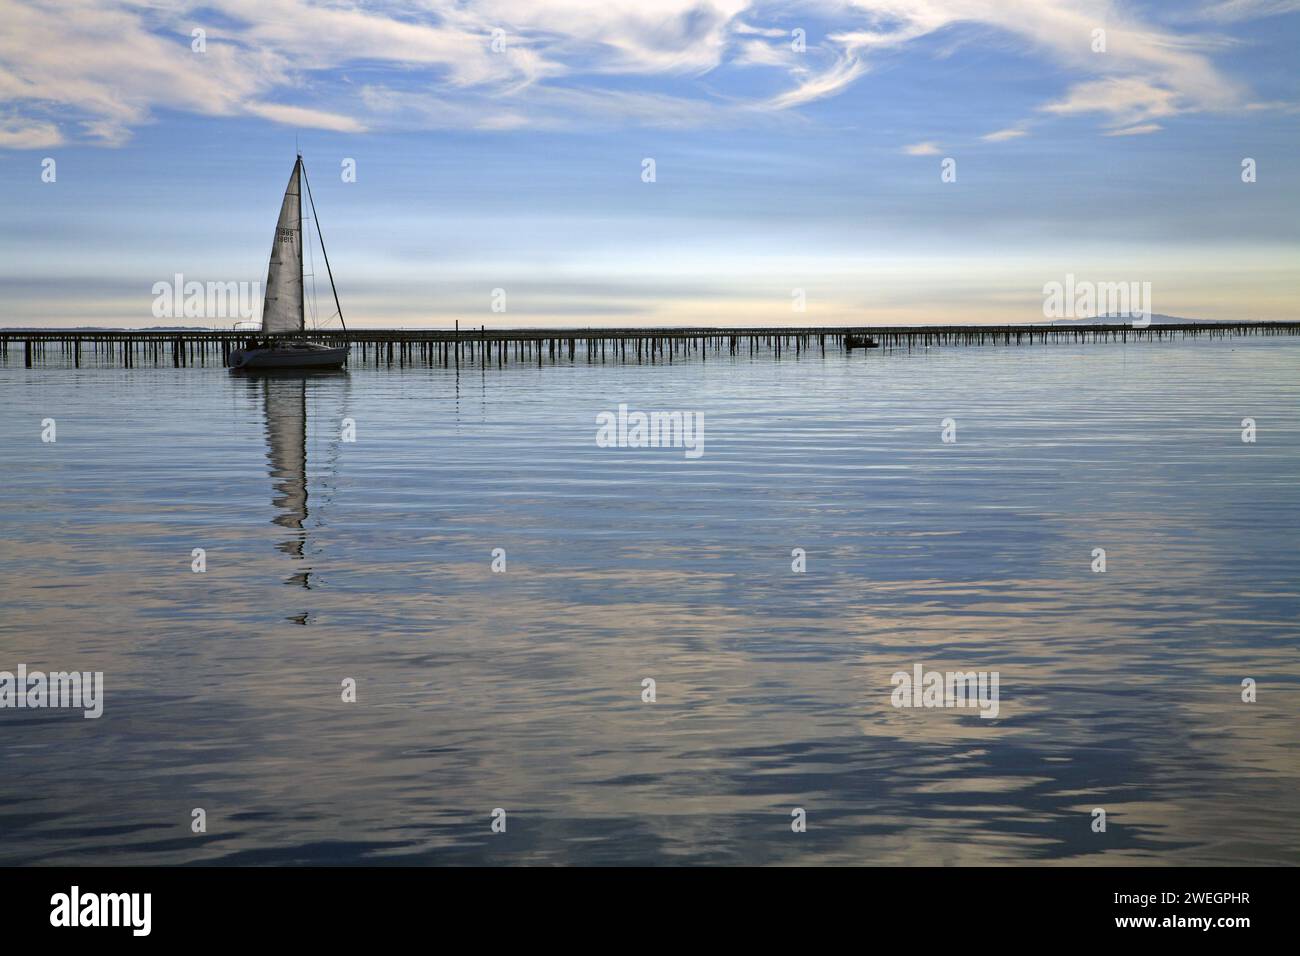 Sailing on the Pond of Thau, Bouzigues, Languedoc Roussillon, France Stock Photo